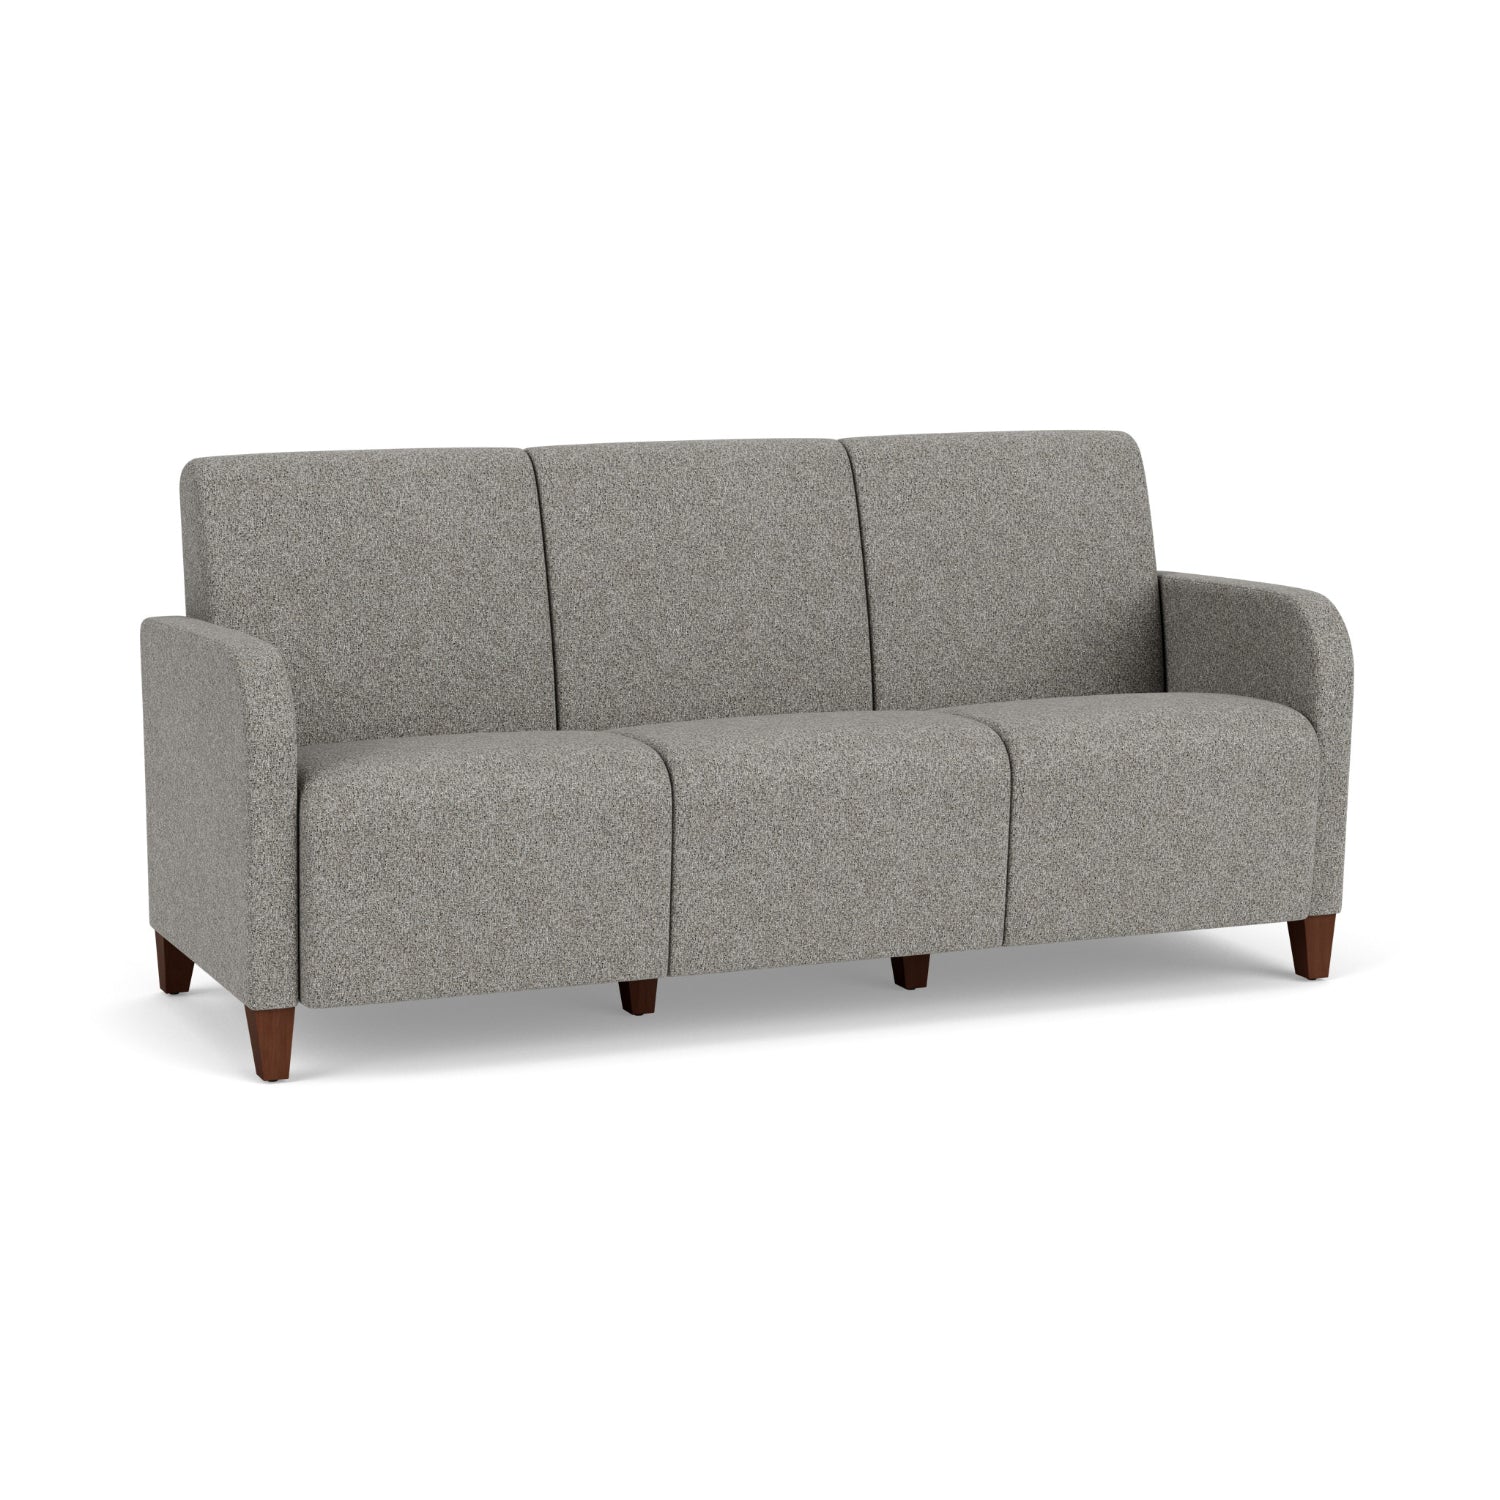 Siena Collection Reception Seating, 3-Seat Sofa, Standard Fabric Upholstery, FREE SHIPPING